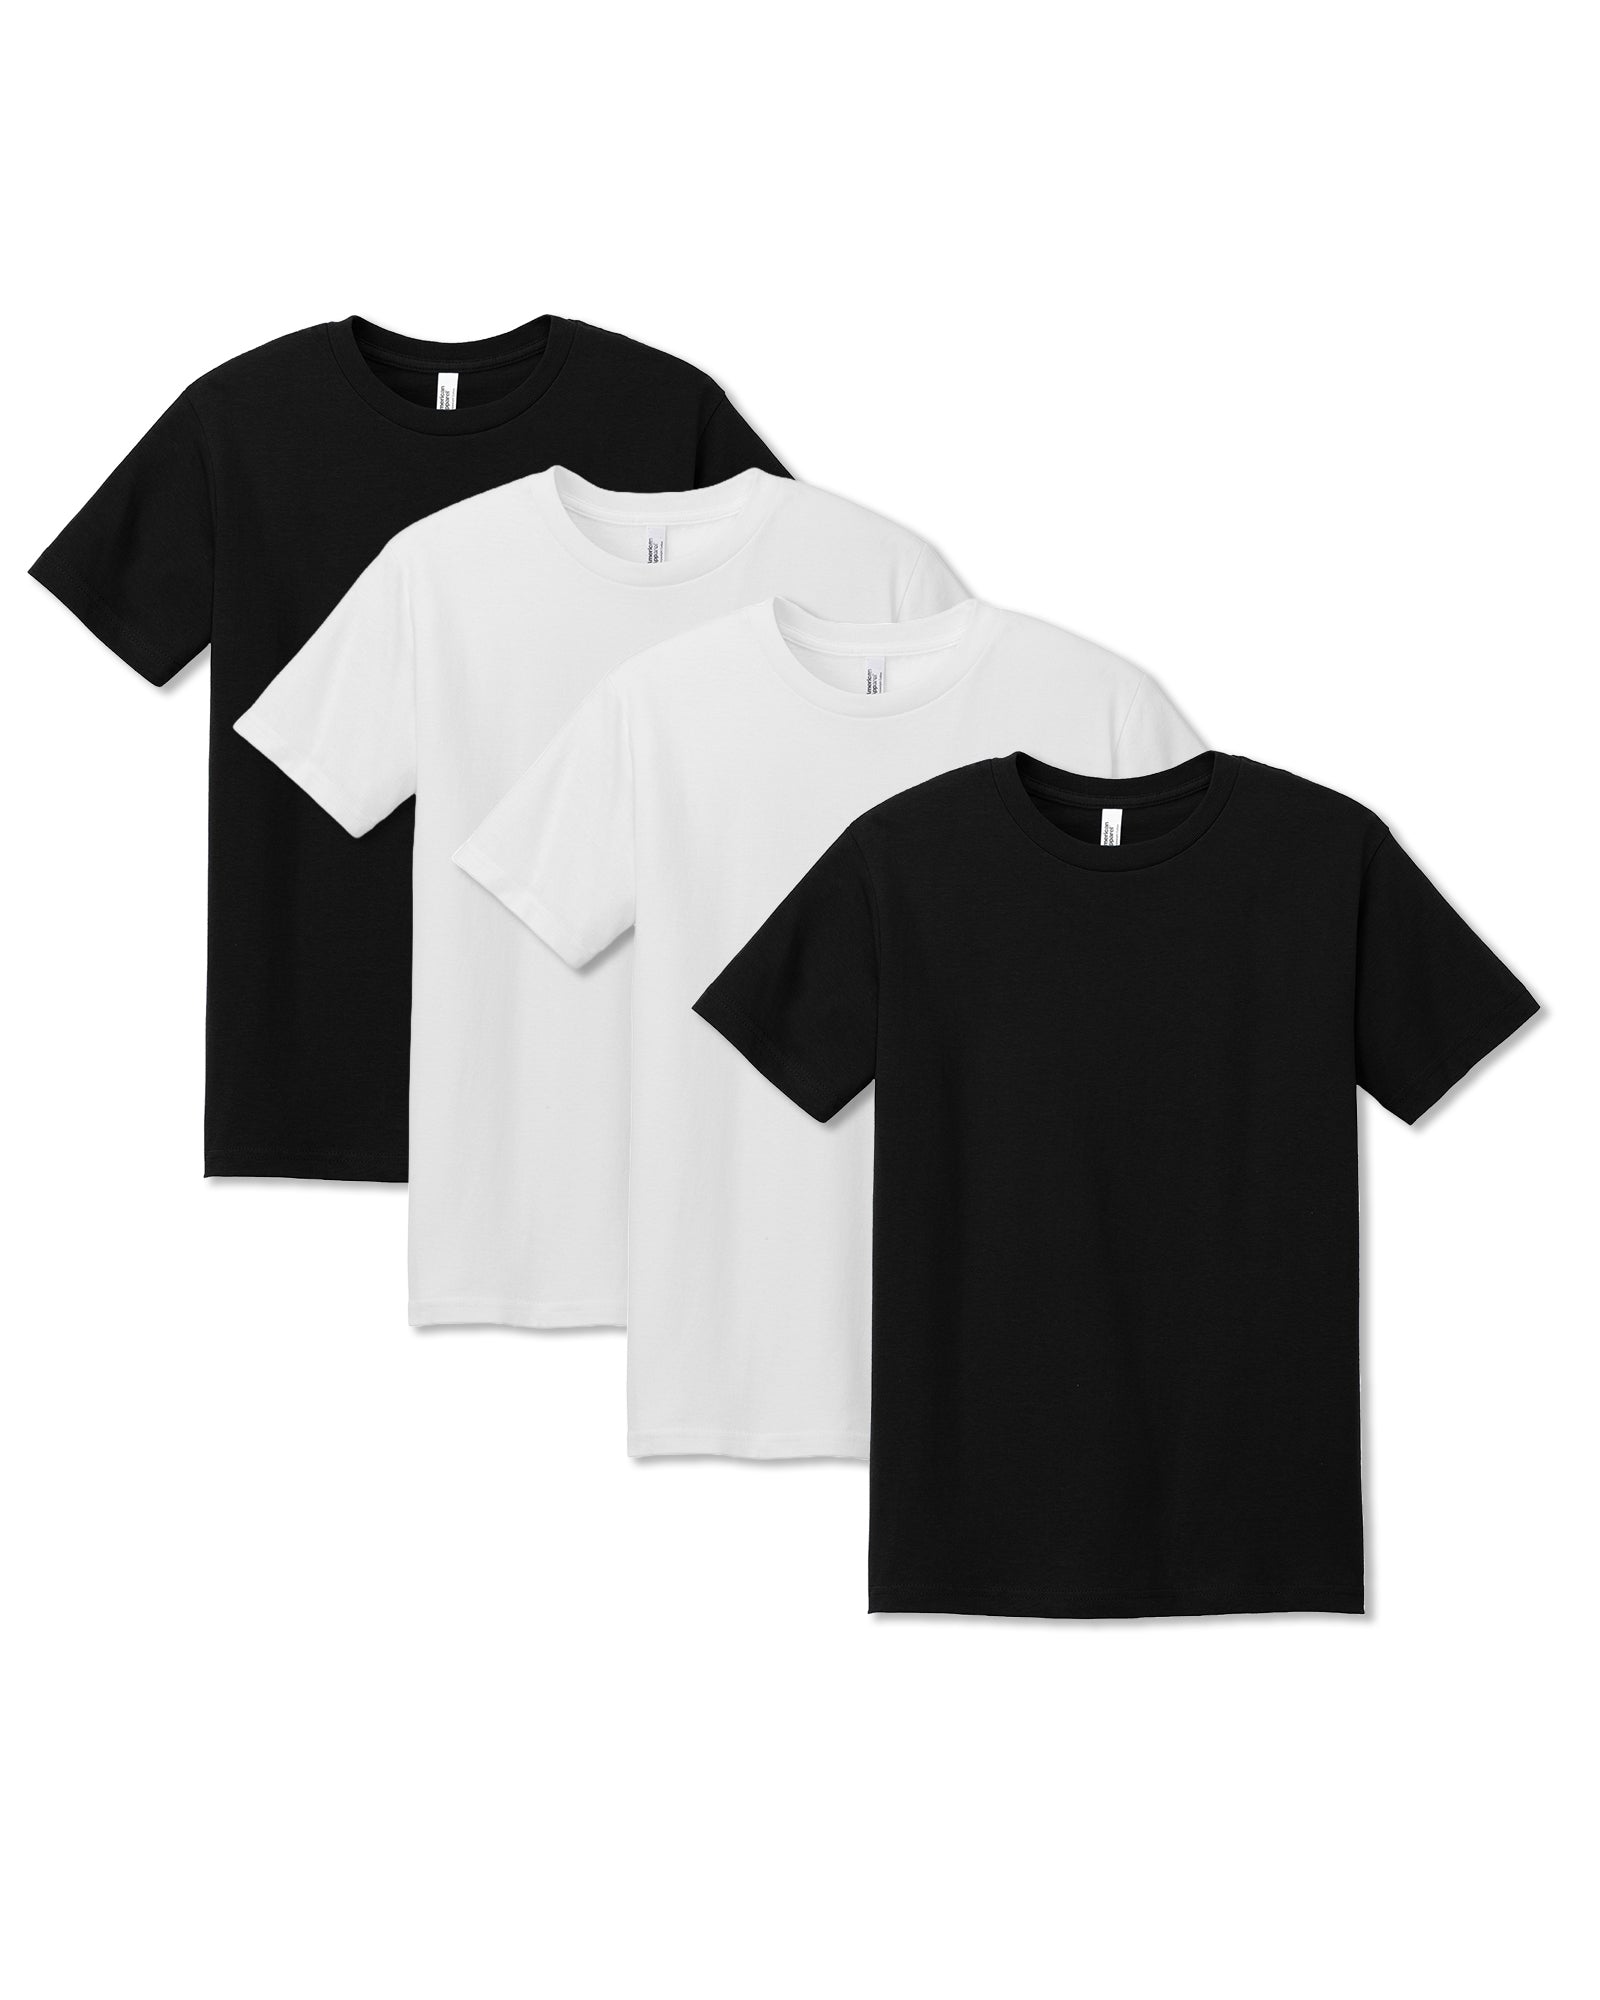 Pack of 4 Heavyweight Unisex T-Shirt Black and White